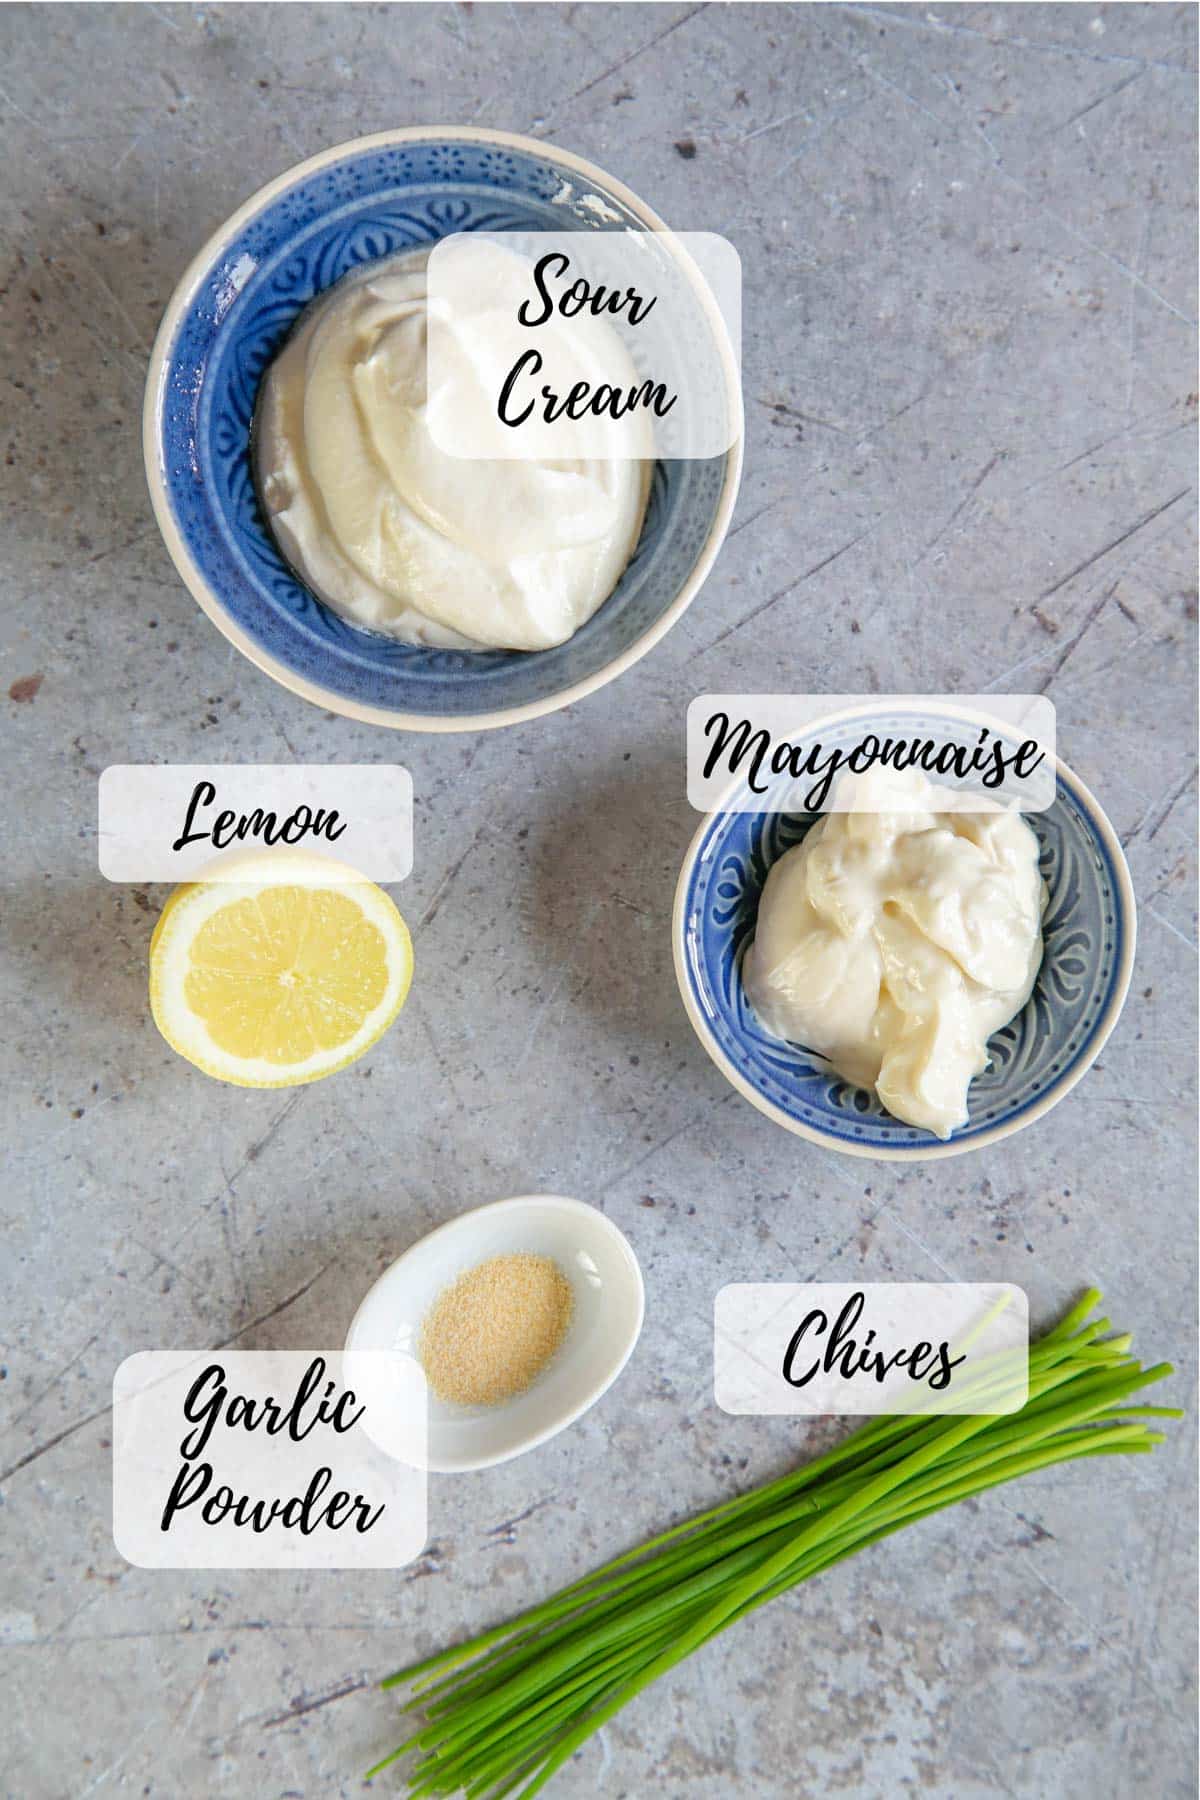 Ingredients for sour cream and chives dip, gathered and ready to prepare: sour cream, mayonnaise, fresh chives, garlic powder and lemon juice.